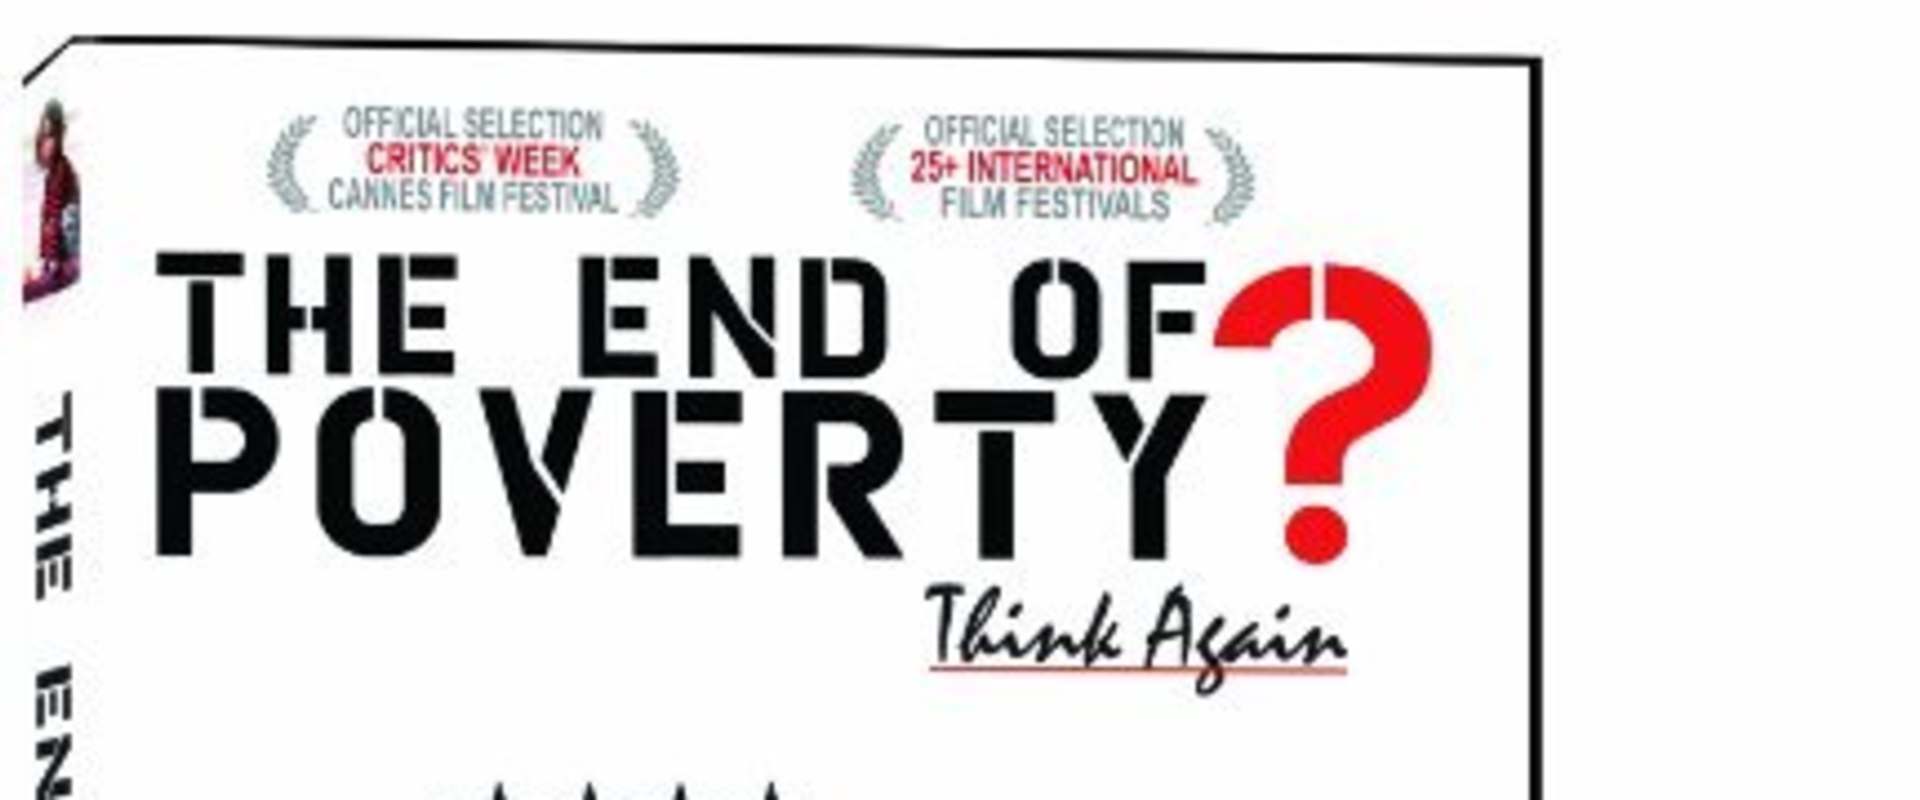 The End of Poverty? background 1